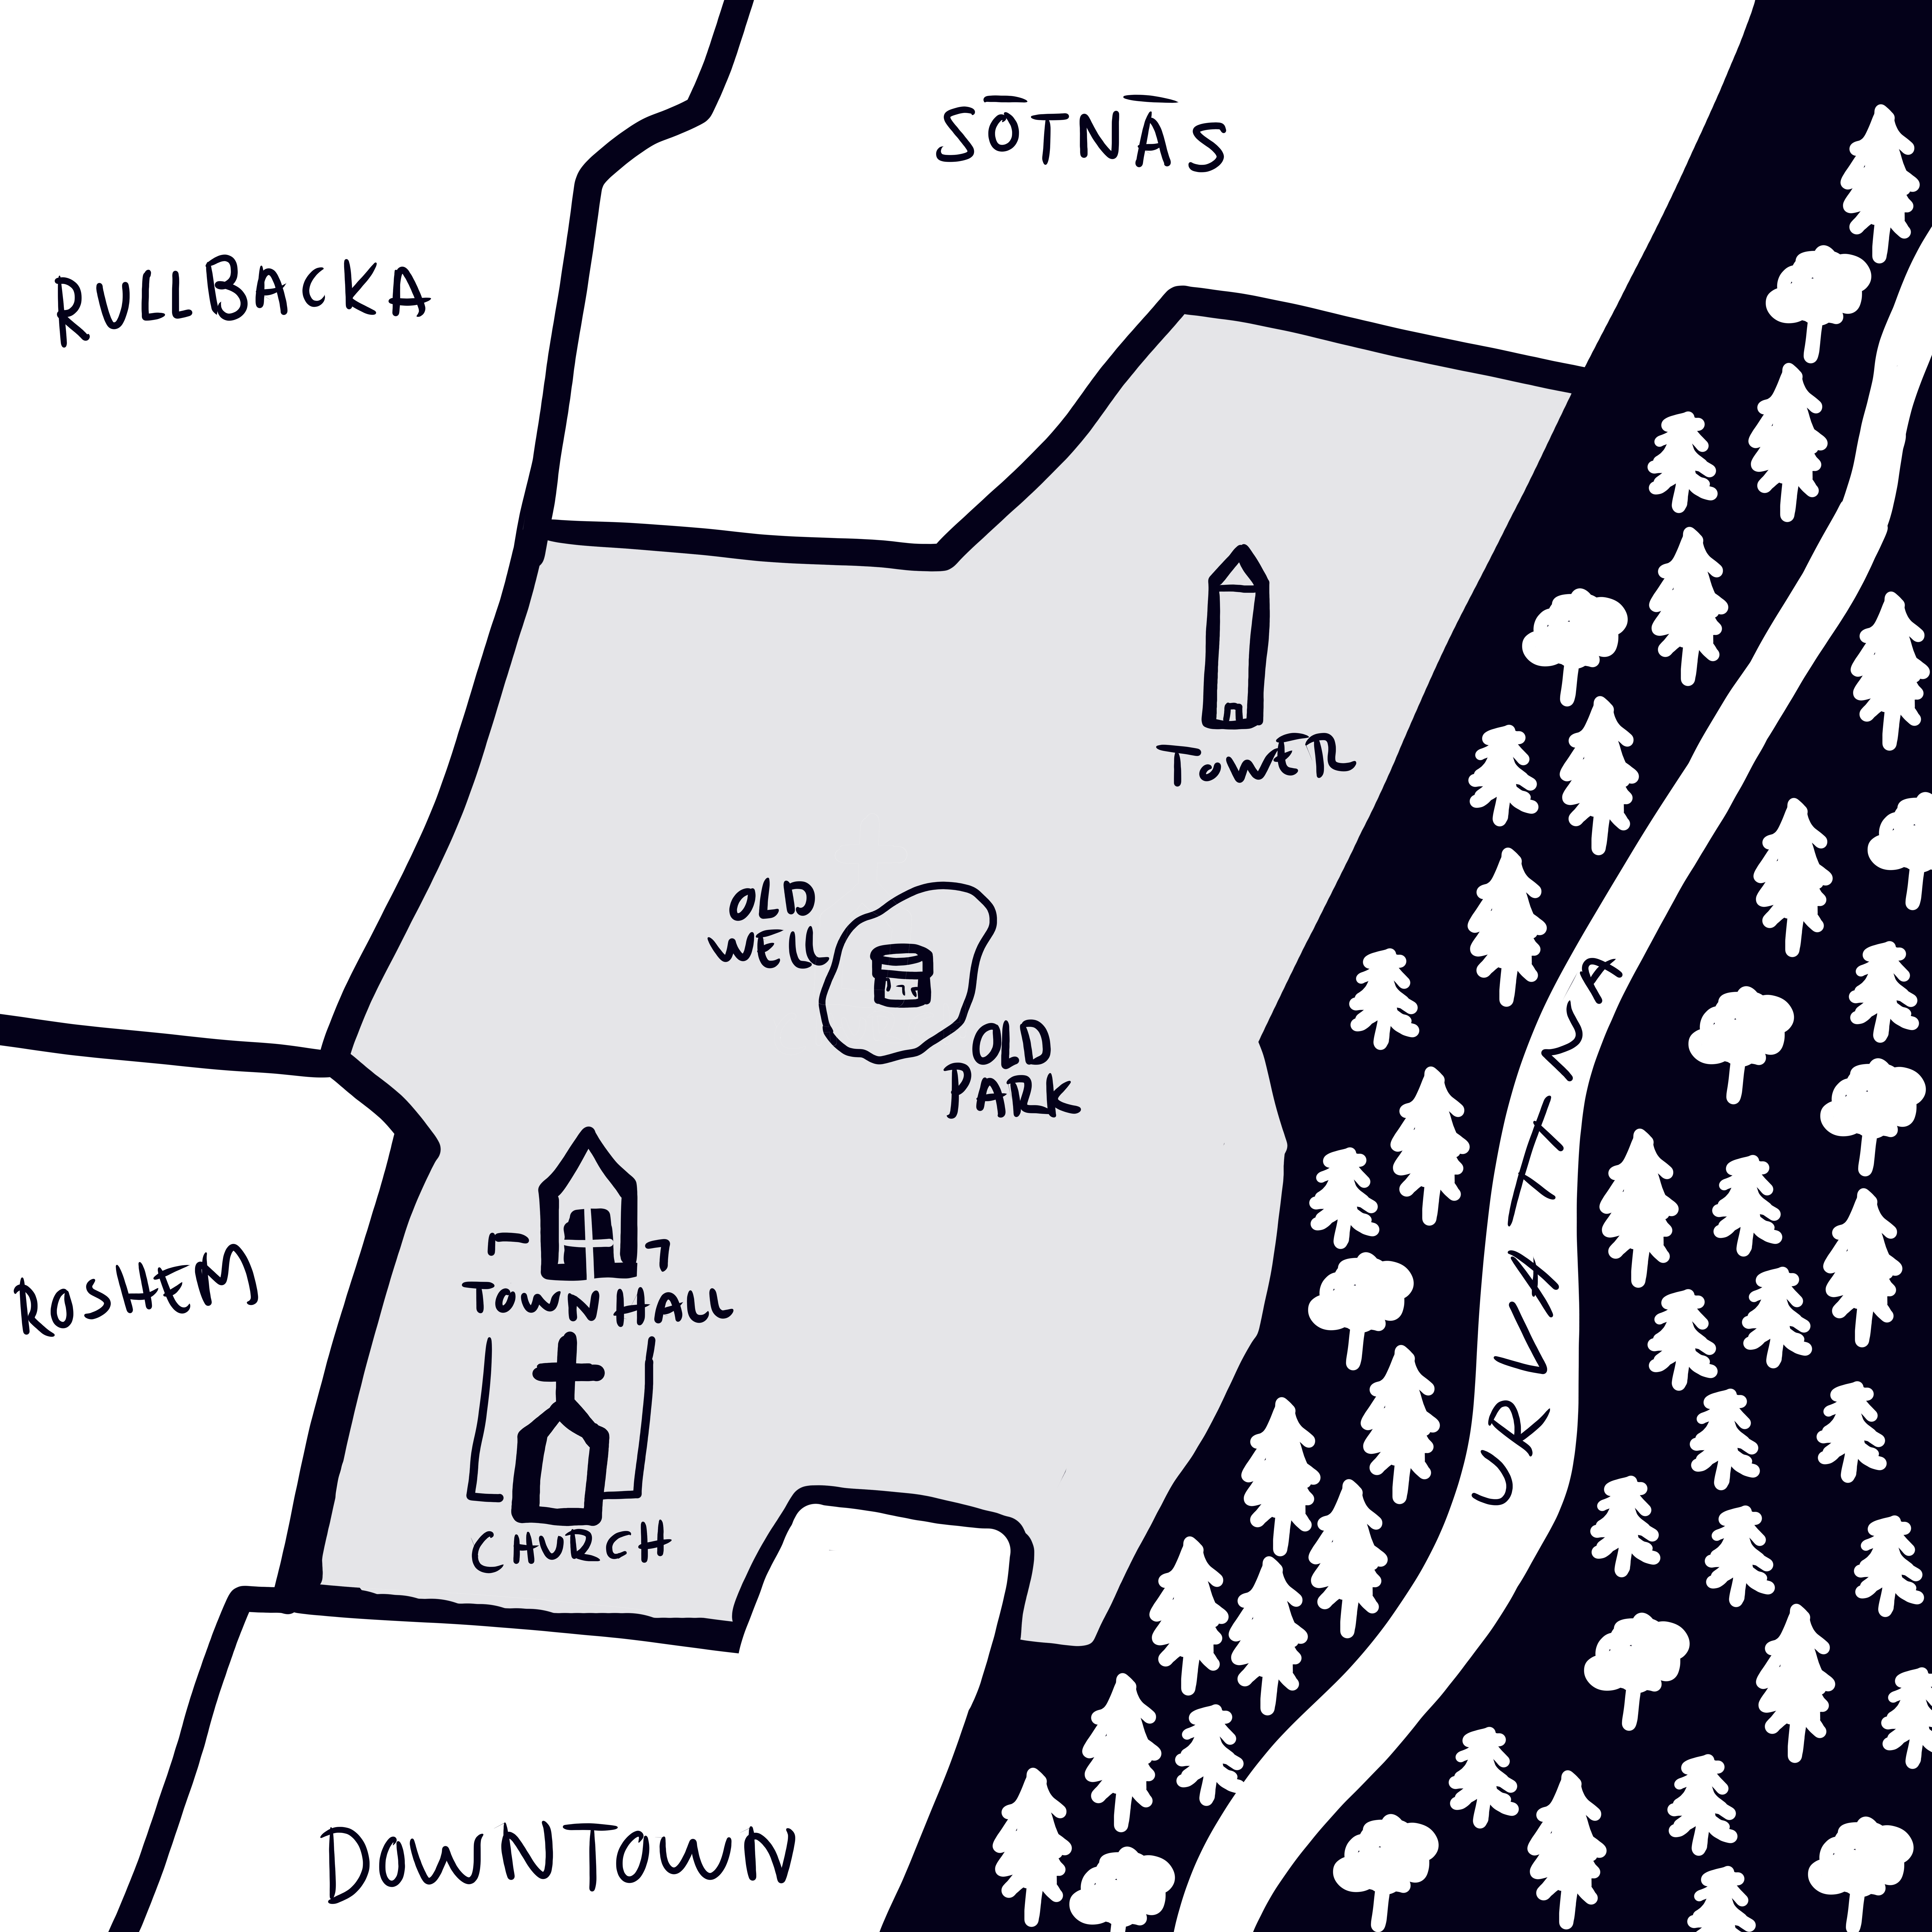 The old districts